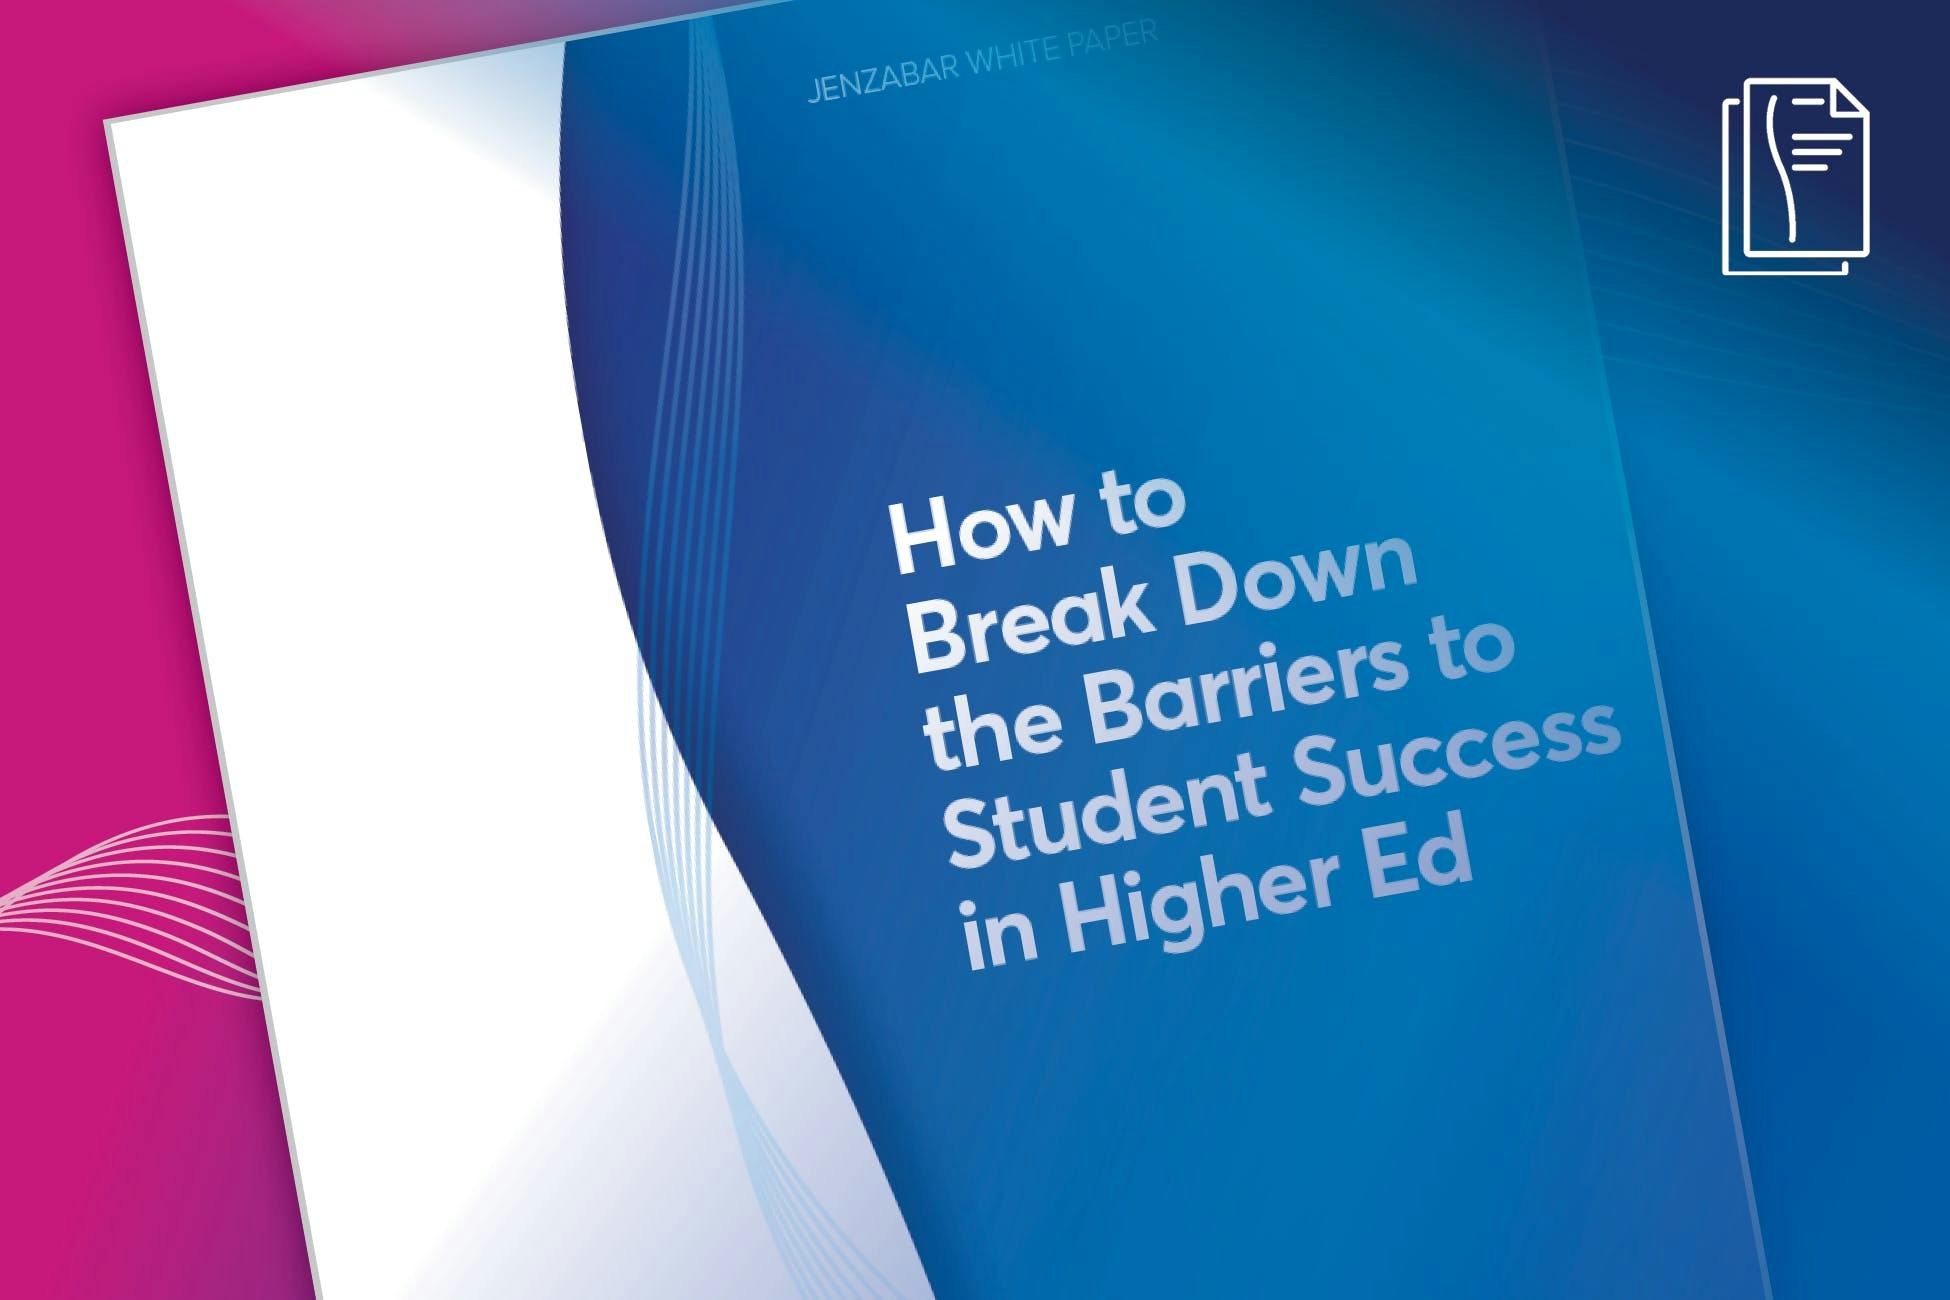 White Paper: How to Break Down the Barriers to Student Success in Higher Education